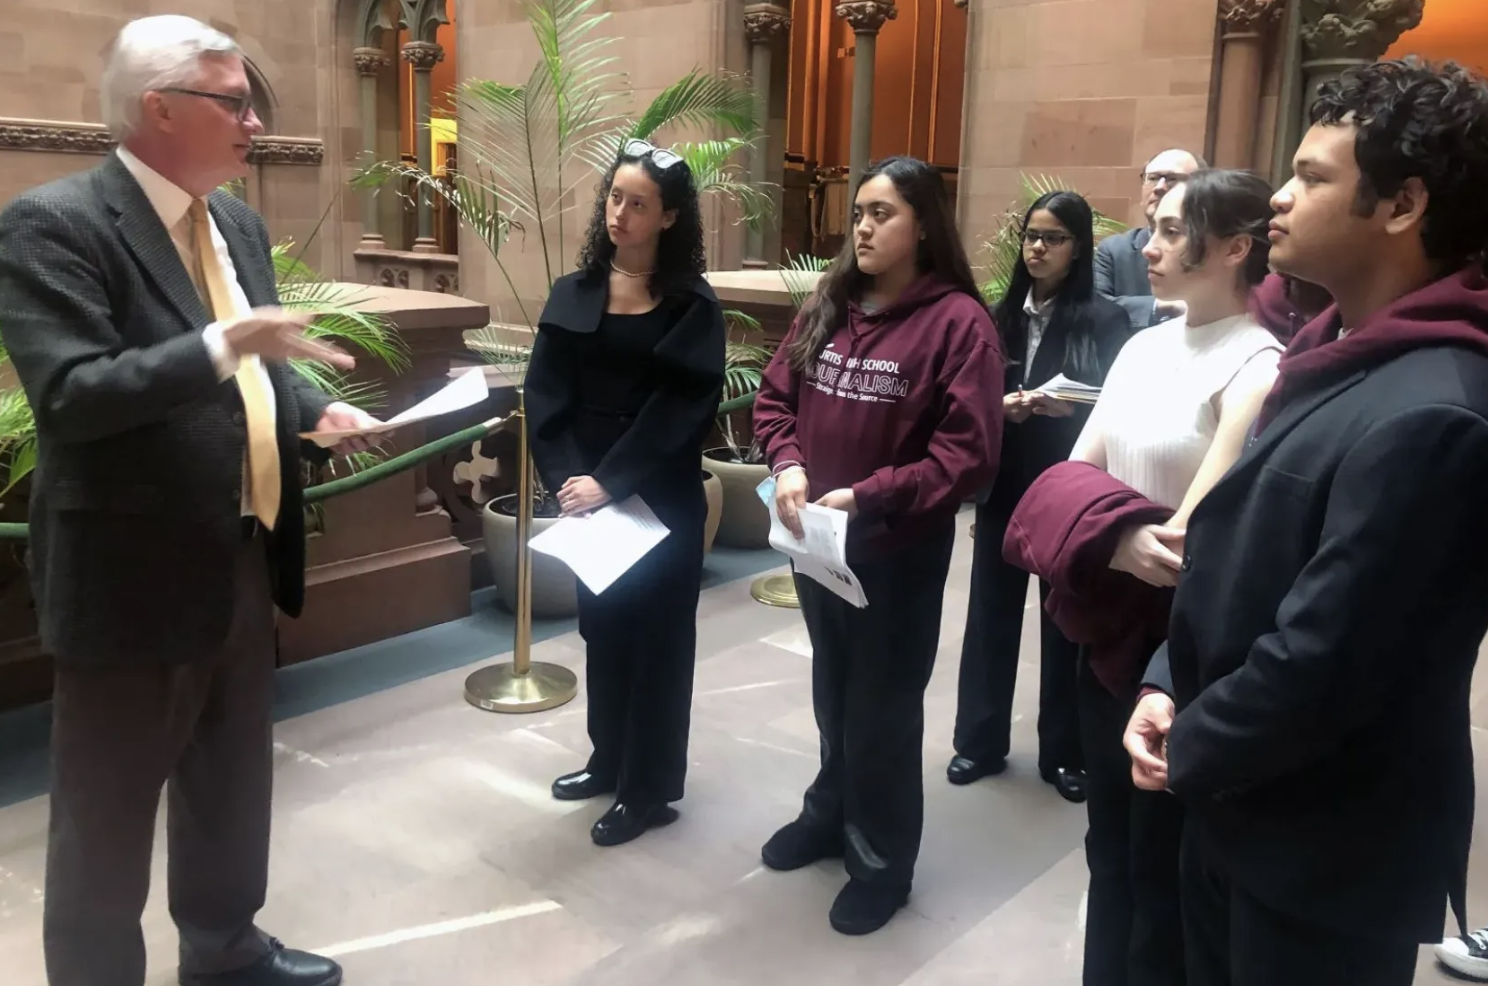 High School Journalists Demand Albany Expand Press Protections